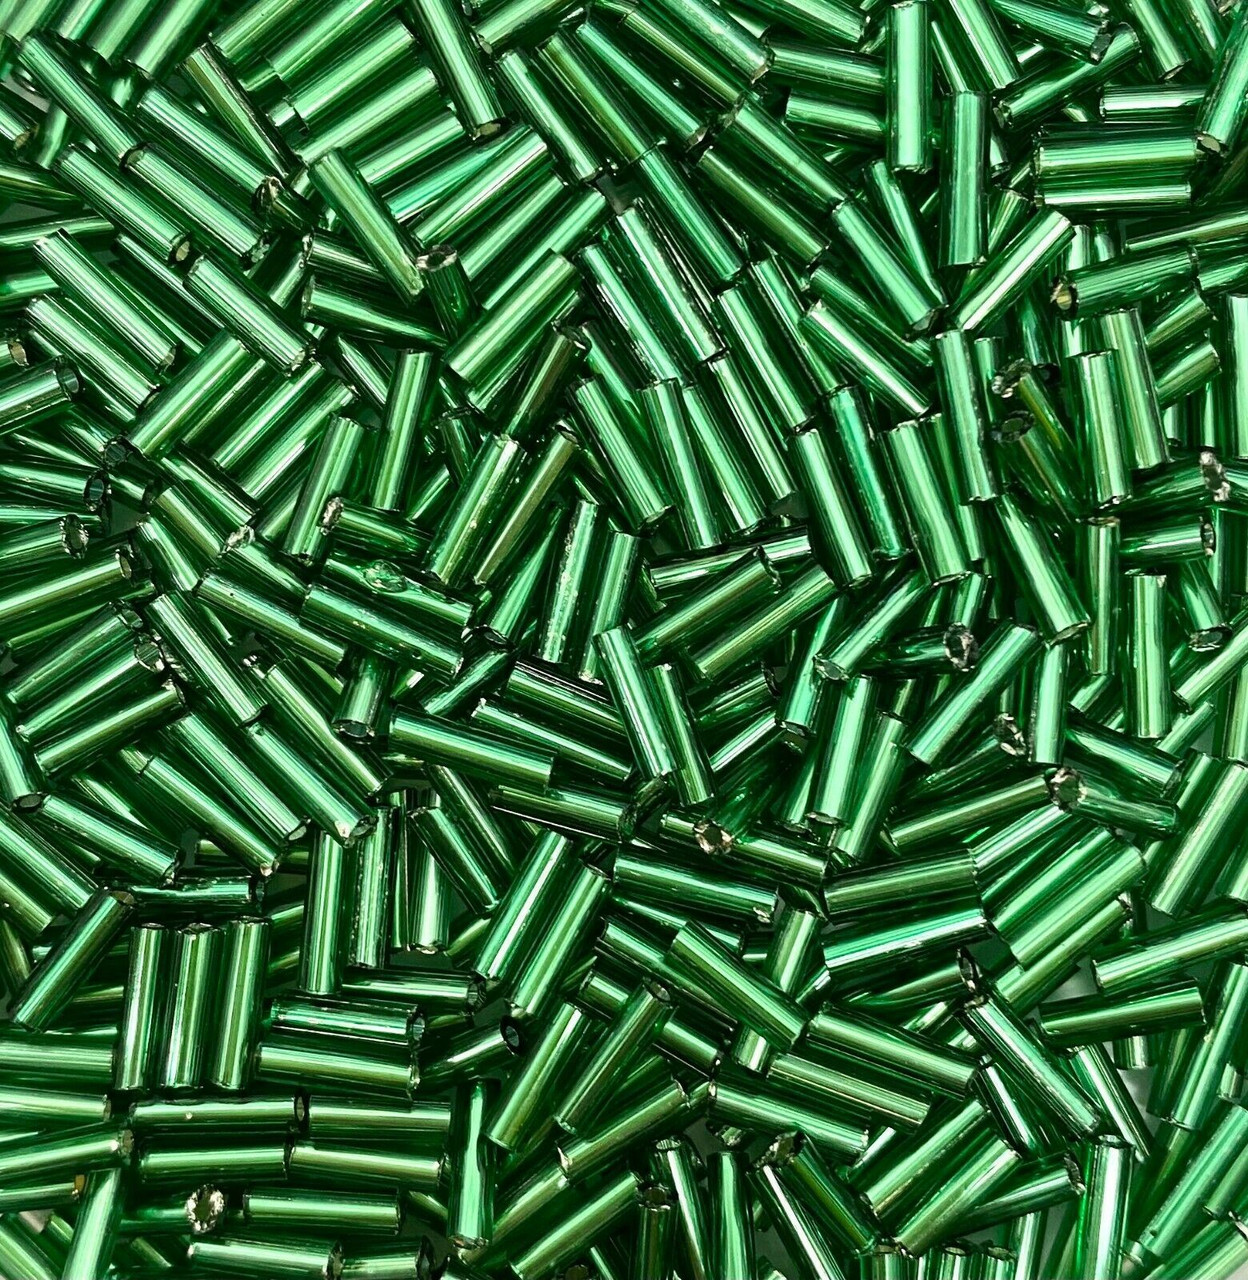 50g glass bugle beads - Dark Green Silver-Lined - approx 6mm